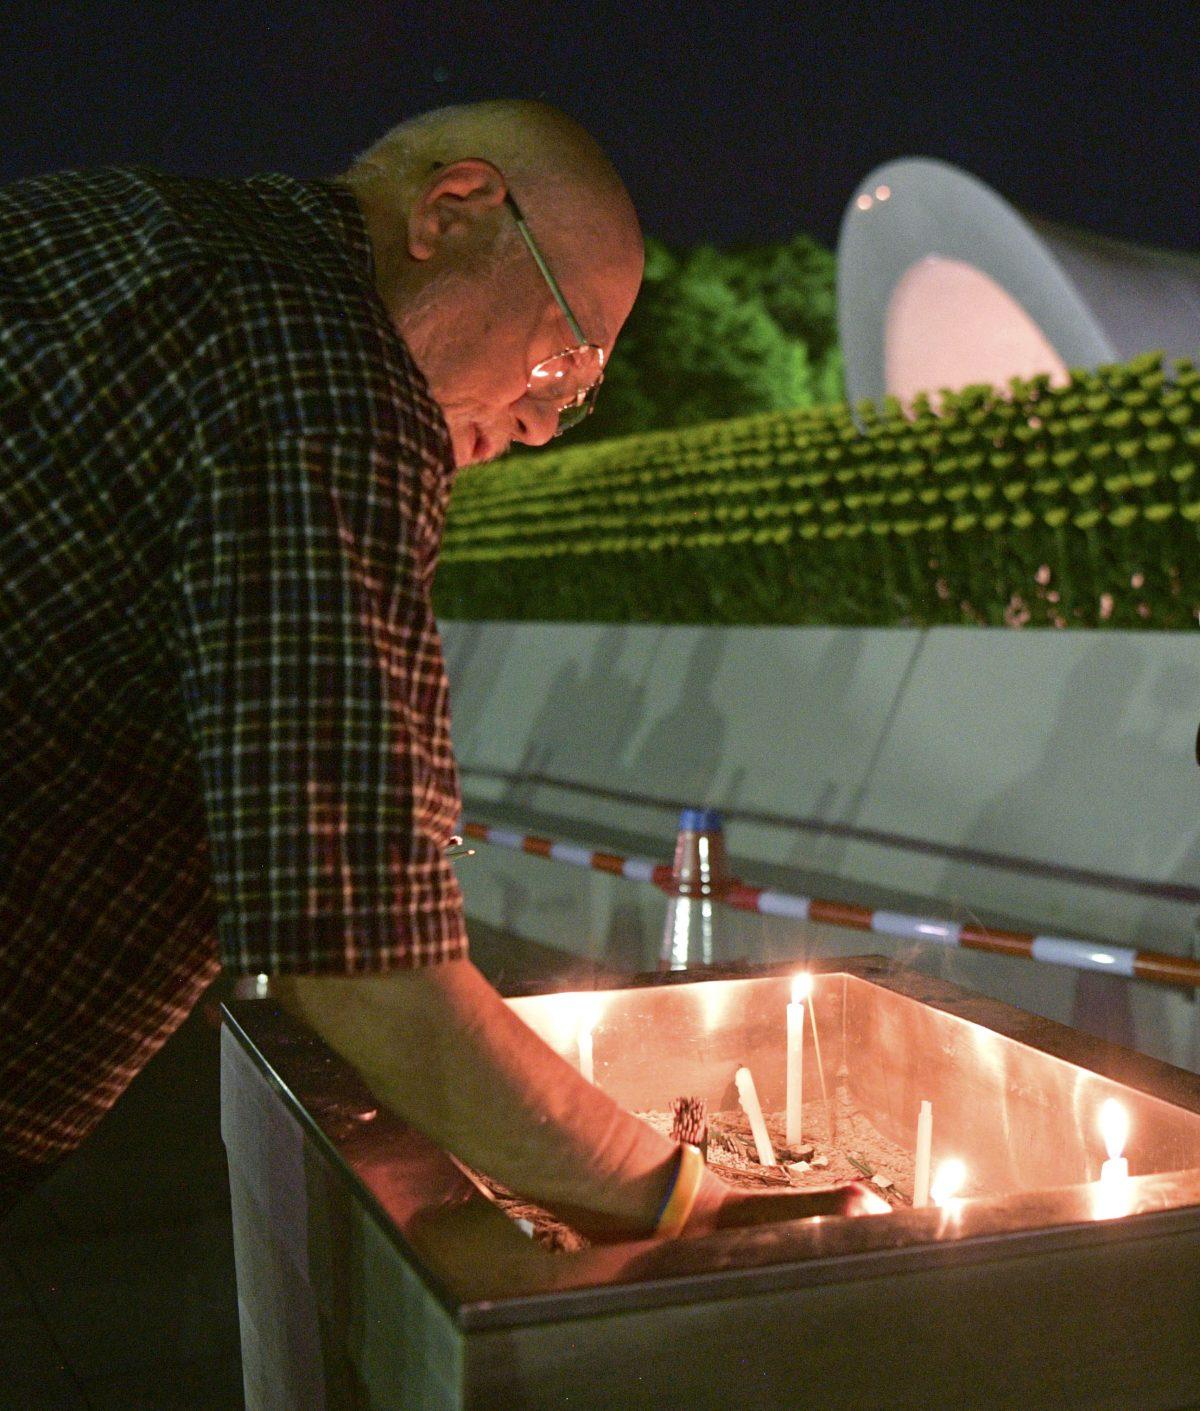 A man burns a stick of incense at the cenotaph dedicated to the victims of atomic bombing at Hiroshima Peace Memorial Park in Hiroshima, western Japan, early Monday, Aug. 6, 2018, marking the 73rd anniversary of the bombing. (Yohei Nishimura/Kyodo News/AP)